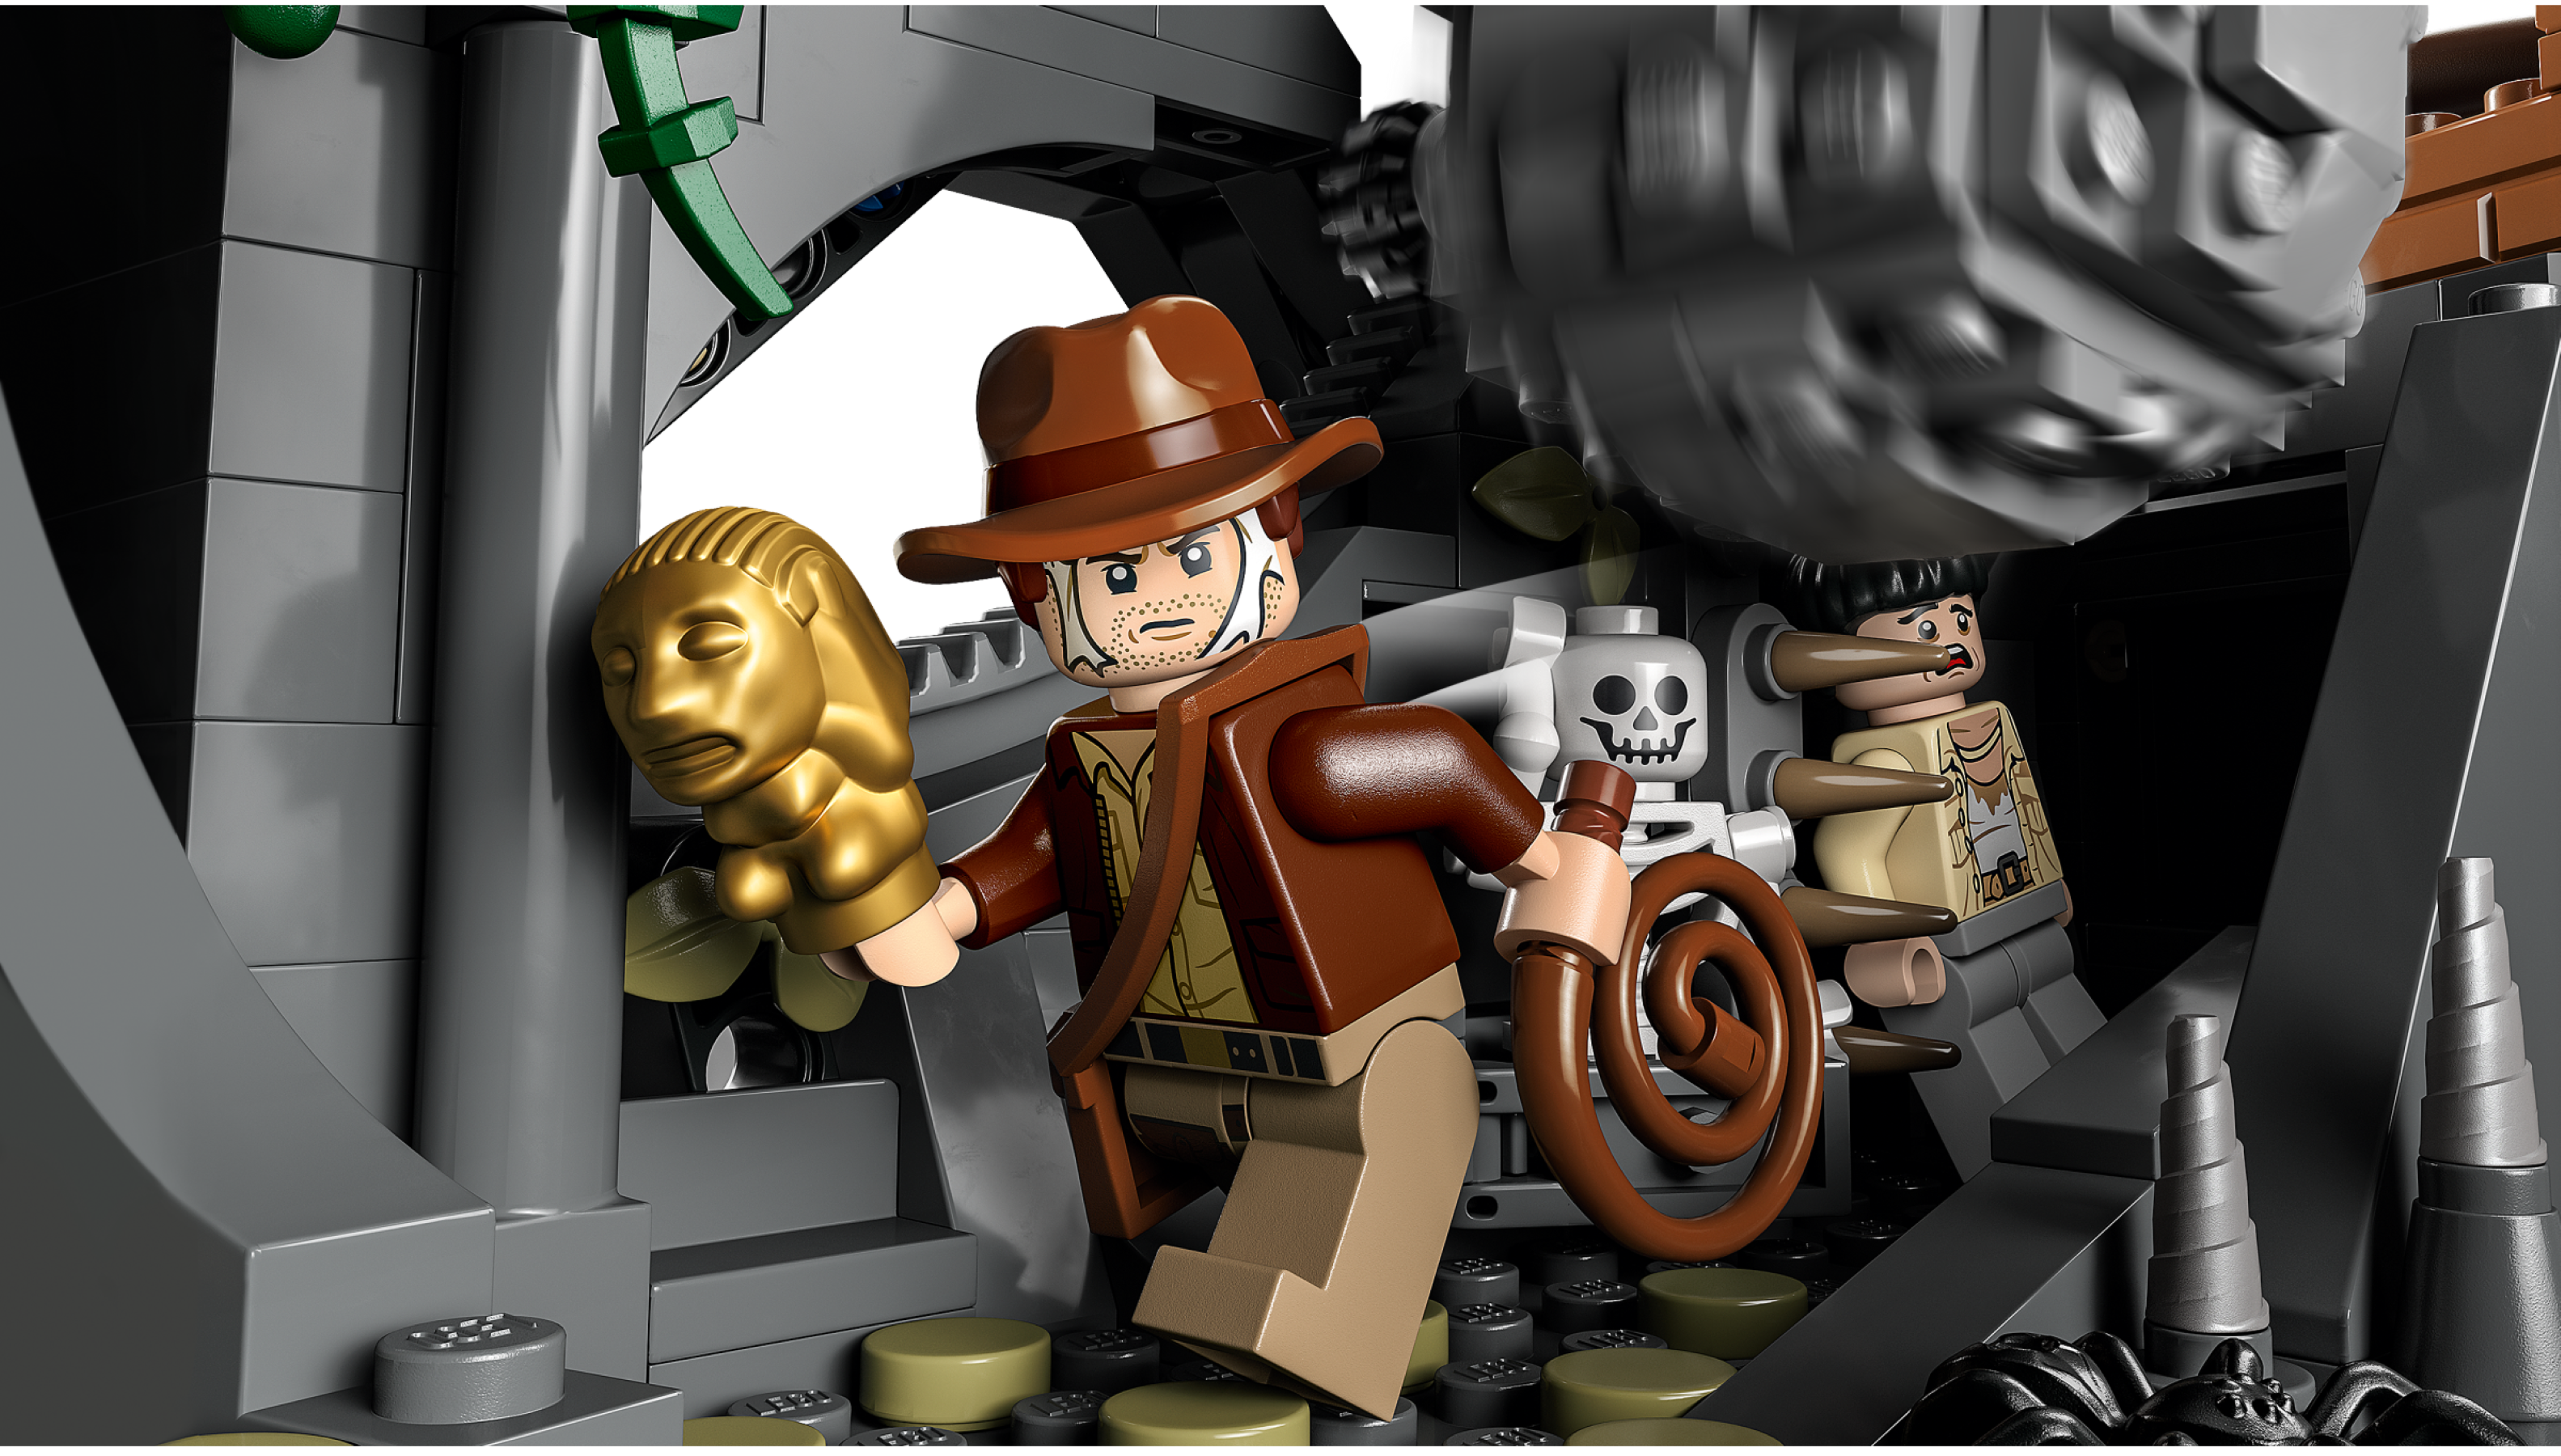  LEGO Indiana Jones Temple of The Golden Idol 77015 Building  Project for Adults, Iconic Raiders of The Lost Ark Movie Scene, Includes 4  Minifigures: Indiana Jones, Satipo, Belloq and a Hovitos